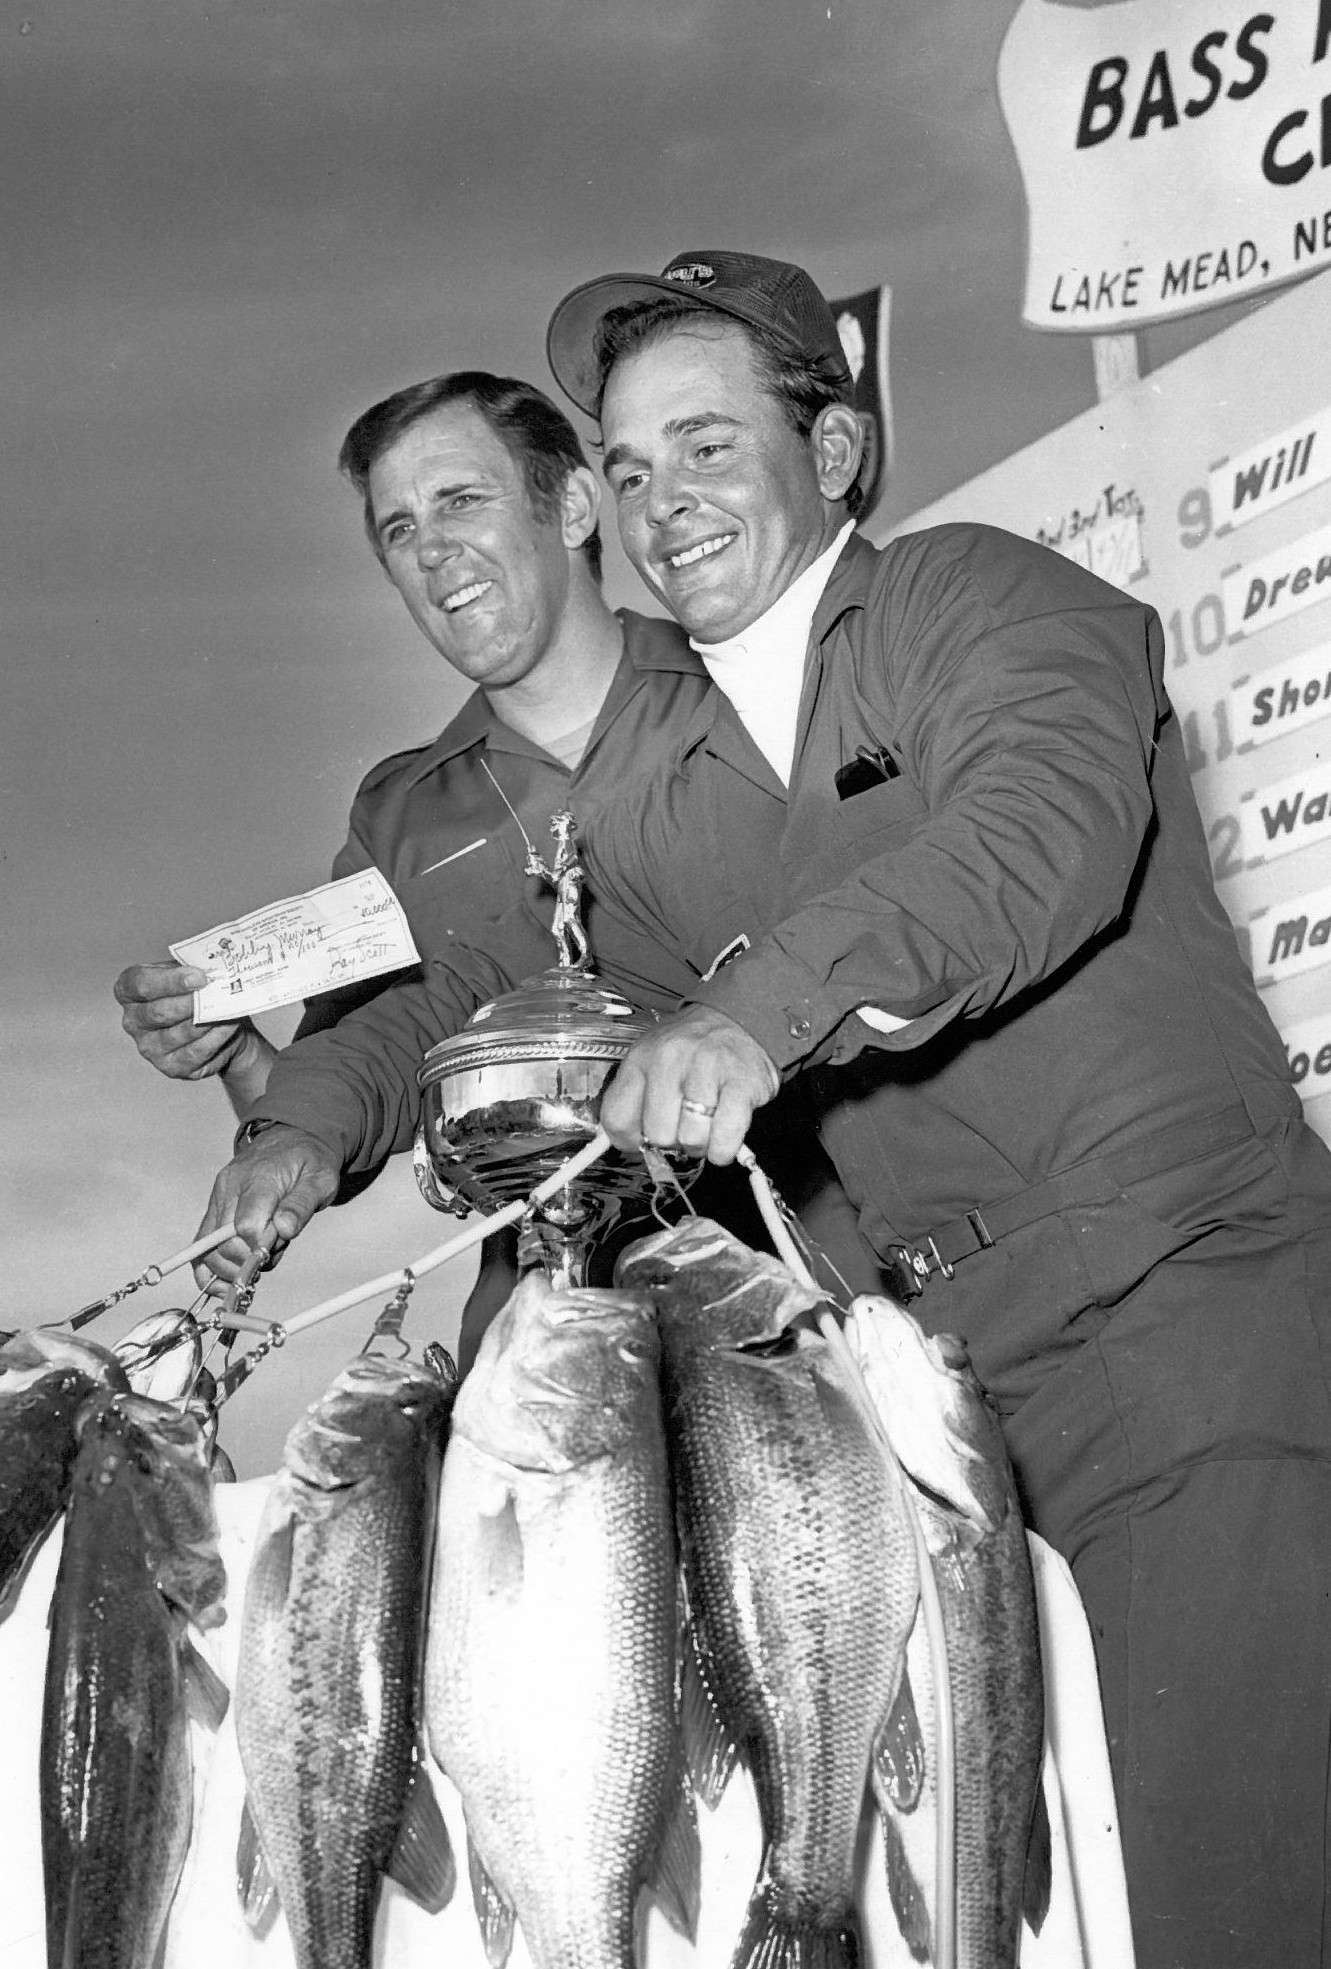 Ironically, the spinnerbait he used to win was a Zorro Aggravator, made by Stan Sloan, another competitor in the Classic. Sloan finished in 21st place with 5 pounds, 1 ounce. Sloan had won Ray Scott's other big first, the All-American Tournament on Beaver Lake in 1967.